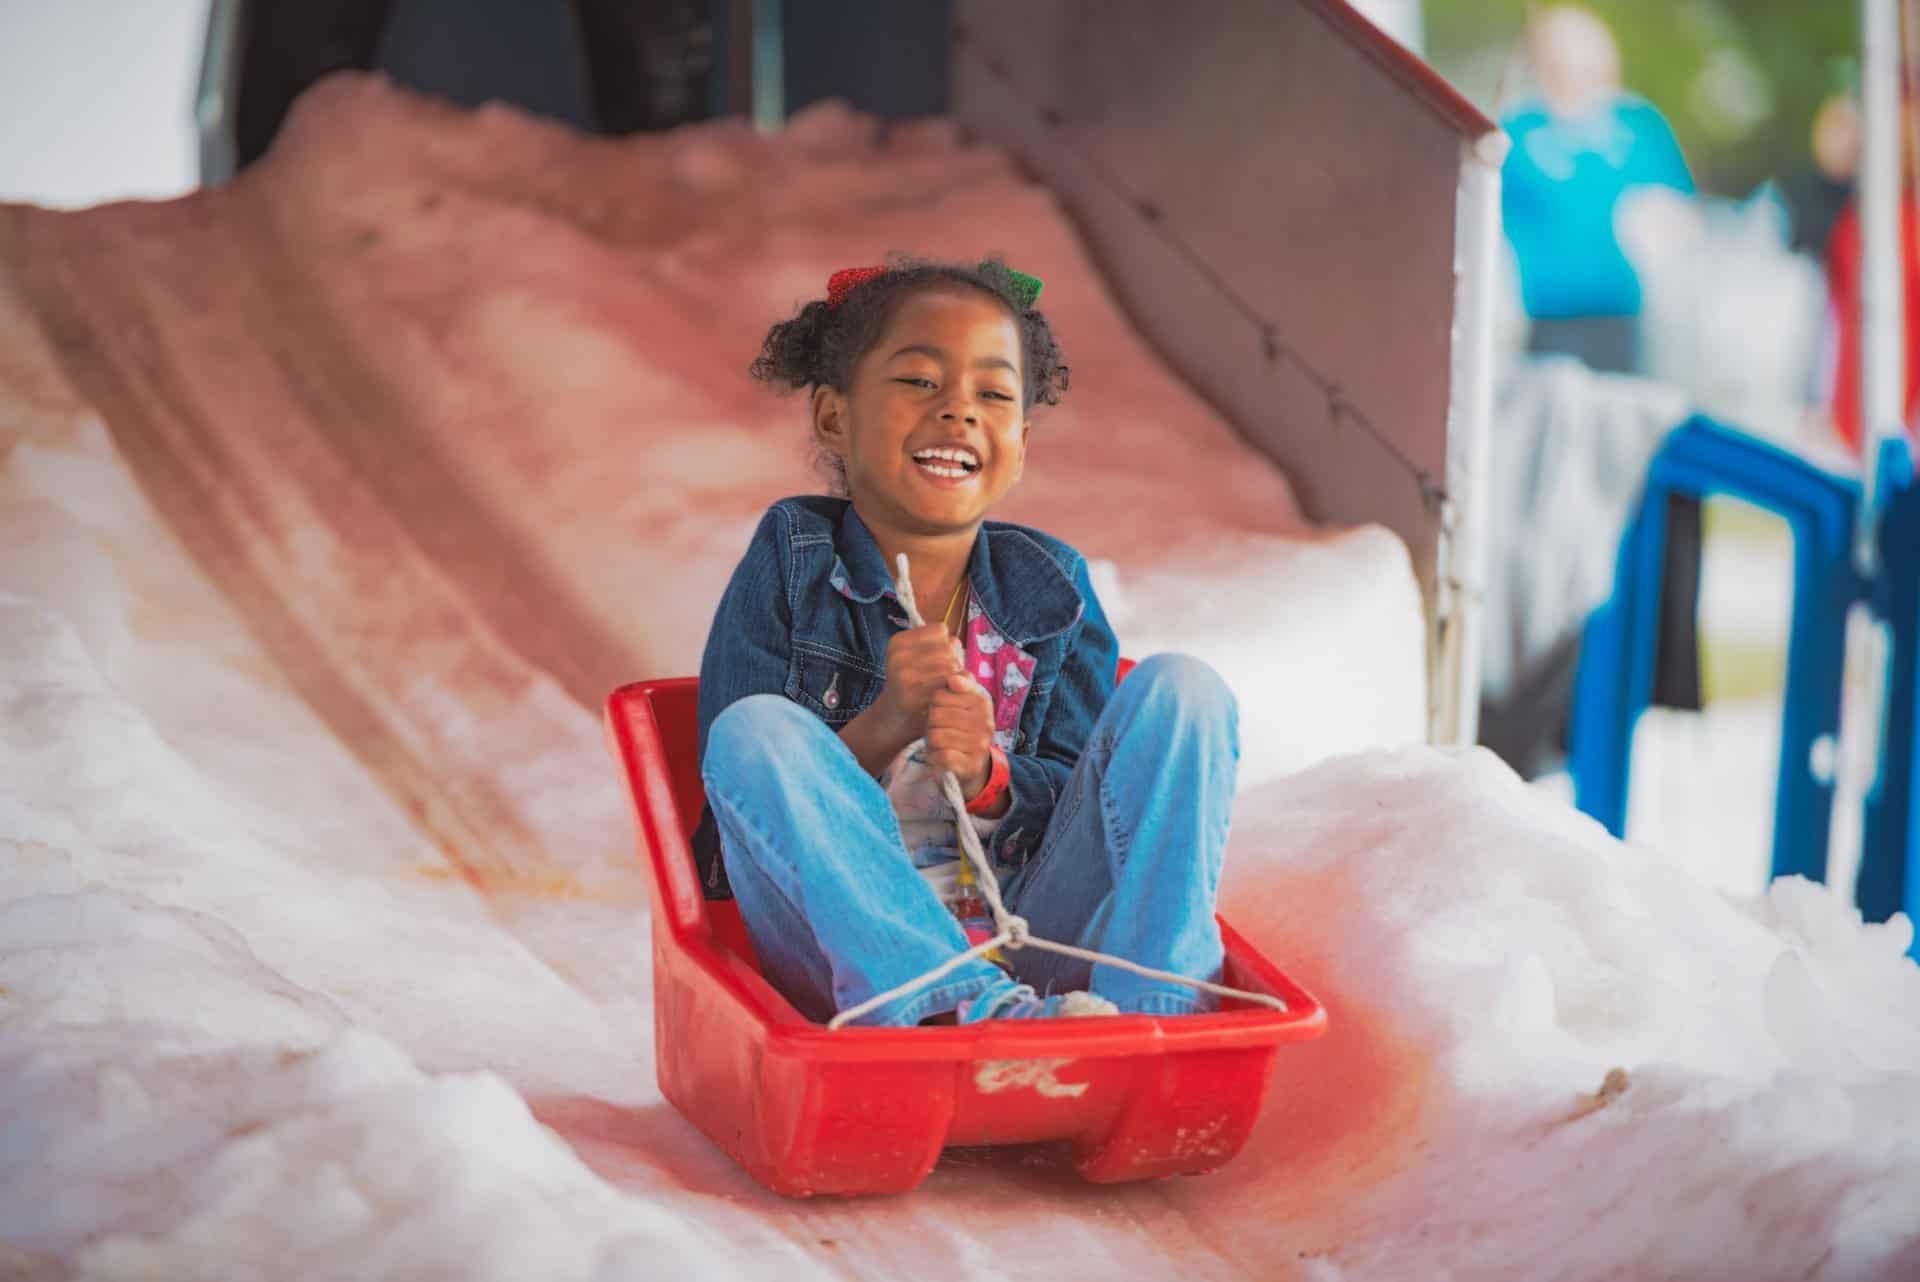 young girl riding on a sled